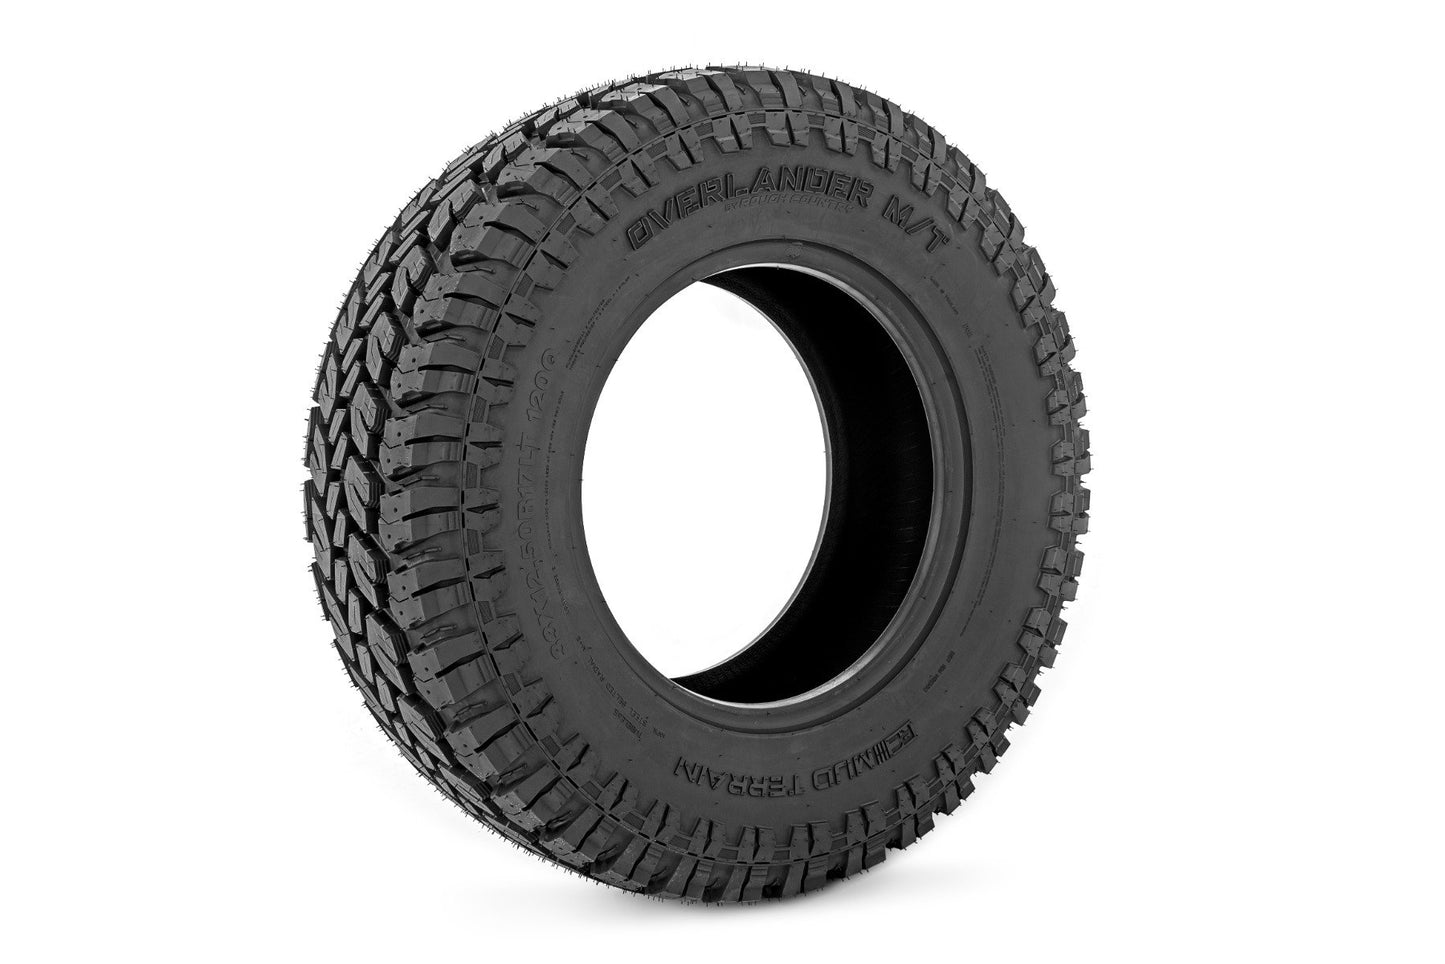 33x12.50R17 Rough Country Overlander M/T